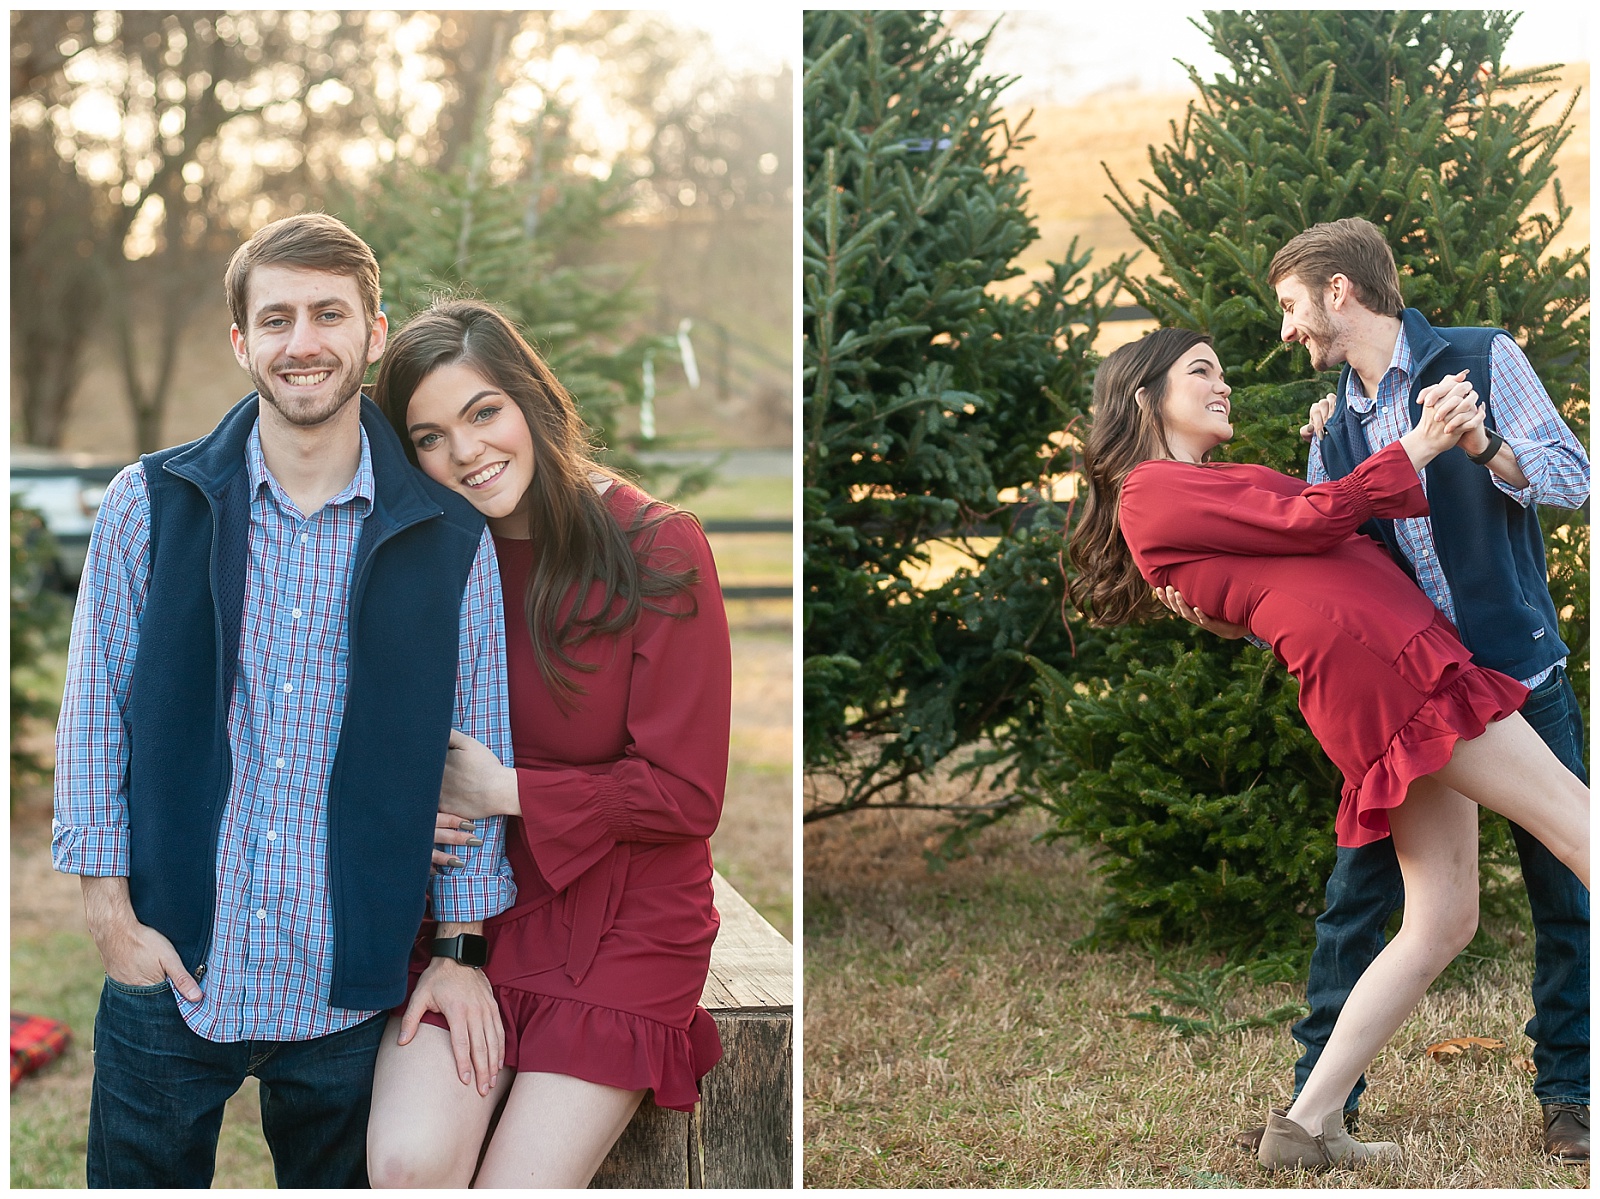 Christmas Session at Bare Creek Tree Farm / Abby and Dylan - chelseawellsphoto.com